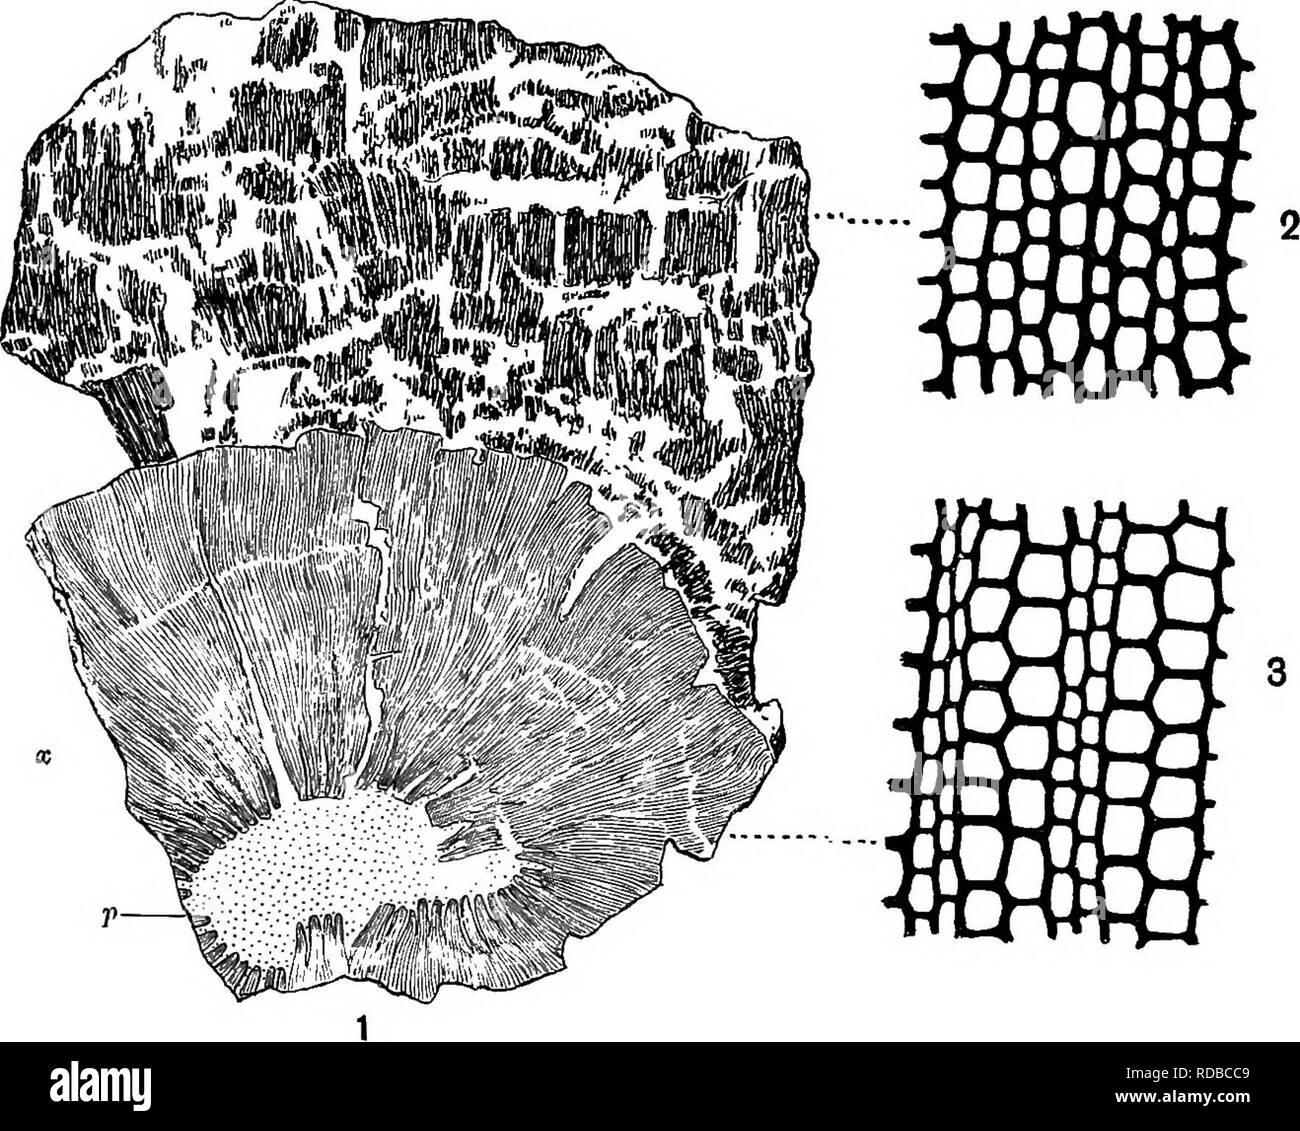 . Fossil plants : for students of botany and geology . Paleobotany. 318 CALAMITES. [CH. regularly arranged (fig. 78, 2) and rather thick-walled cells; this consists of periderm, a secondary tissue, which has been. Fig. 78. 1. Transverse section of a, thick Calamite stem. p, pith; X, secondary wood; c, bark. (| nat. size.) 2. Periderm cells of bark. 3. Xylem and medullary rays. (2 and 3, x 80.) From a specimen in the Williamson Collection (no. 79). developed by a cork-cambium during the increase in girth of the plant. The more delicate cortical tissues have not been preserved, and the more resi Stock Photo